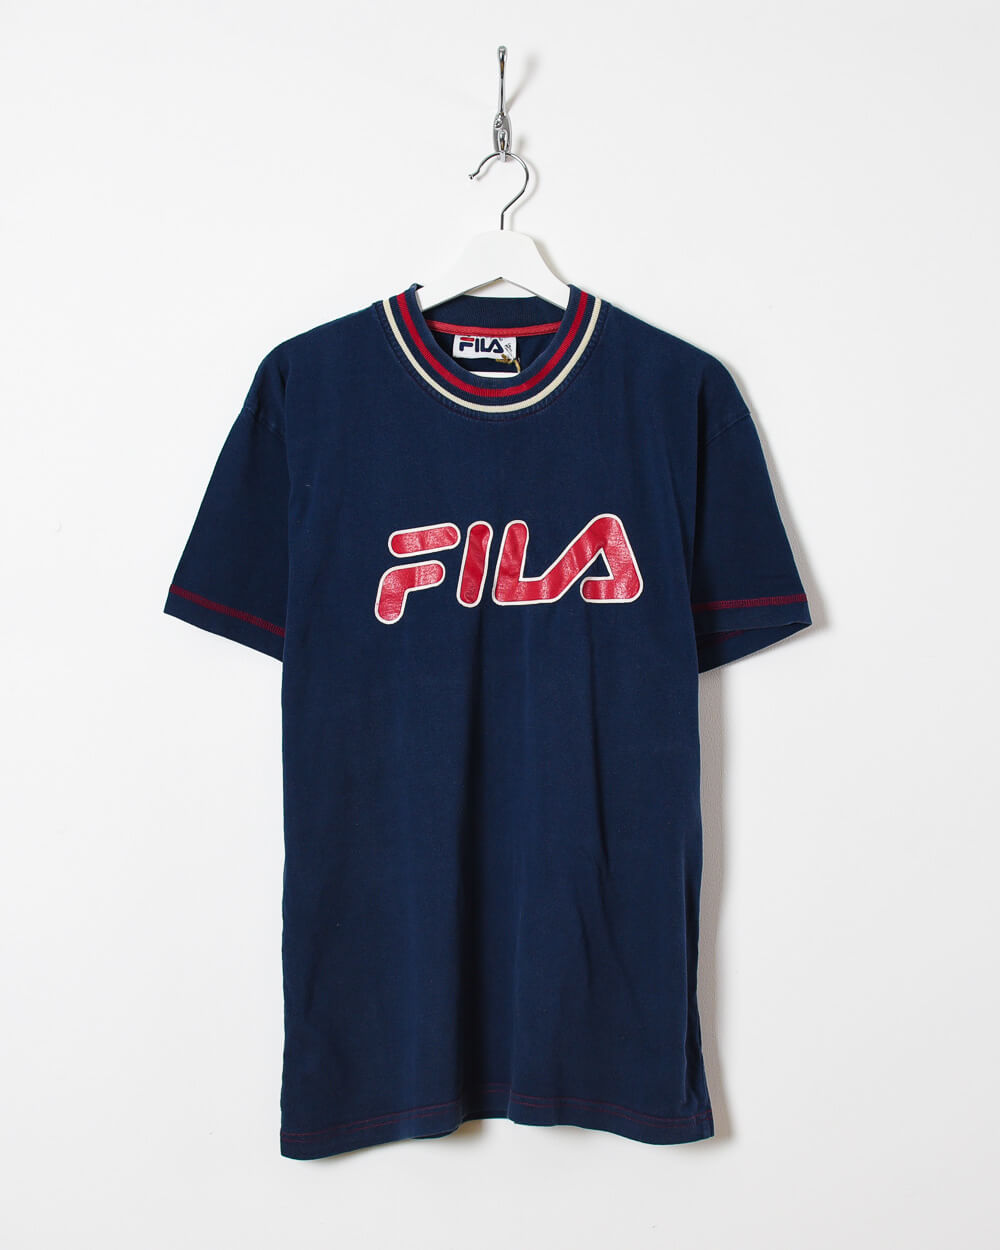 Fila T-Shirt - Small - Domno Vintage 90s, 80s, 00s Retro and Vintage Clothing 